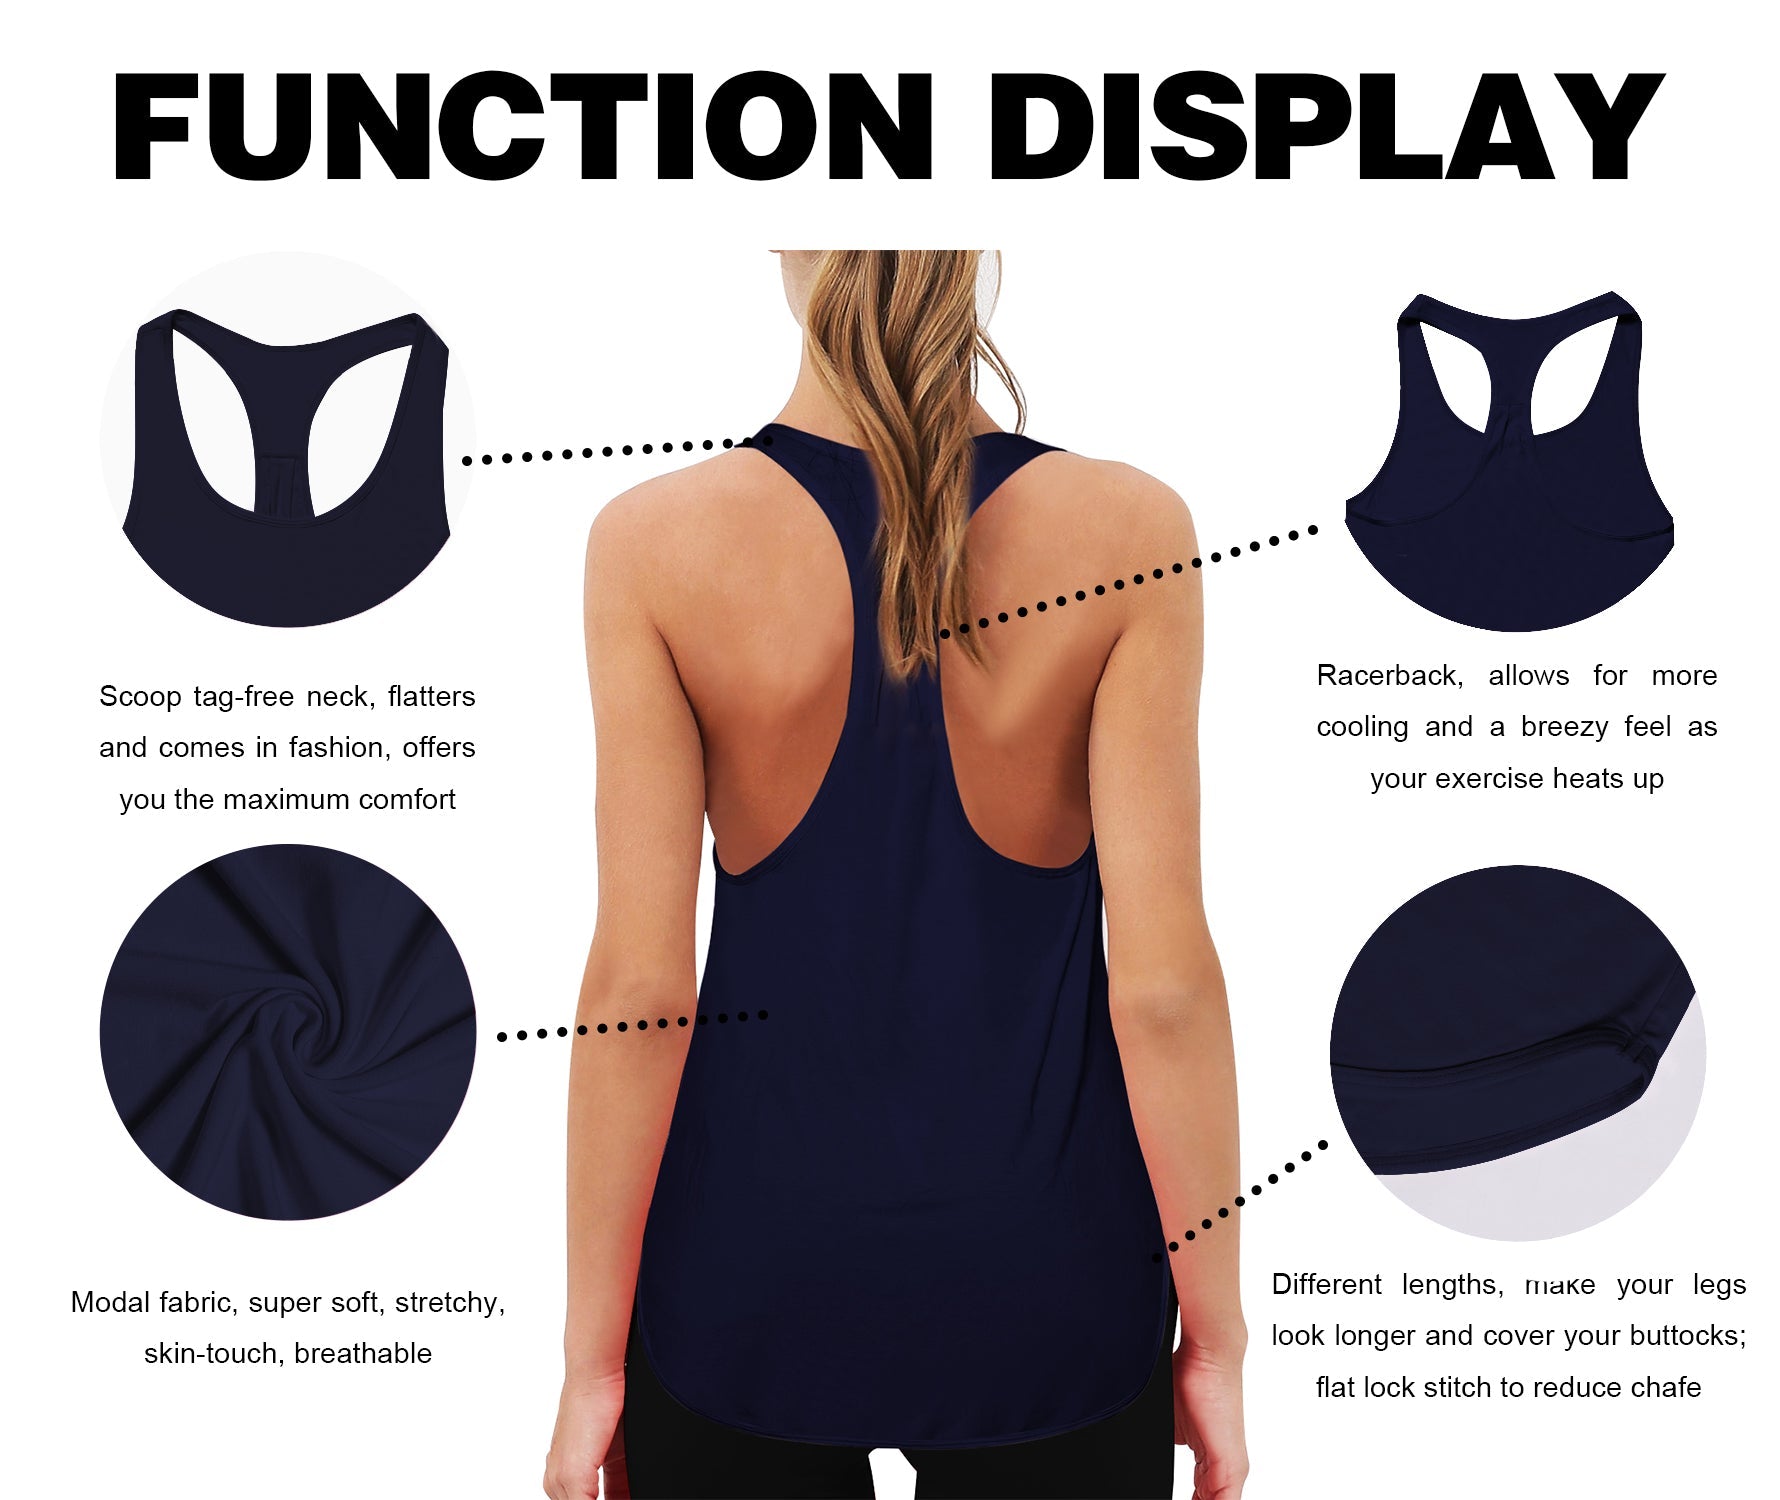 Loose Fit Racerback Tank Top darknavy Designed for On the Move Loose fit 93%Modal/7%Spandex Four-way stretch Naturally breathable Super-Soft, Modal Fabric